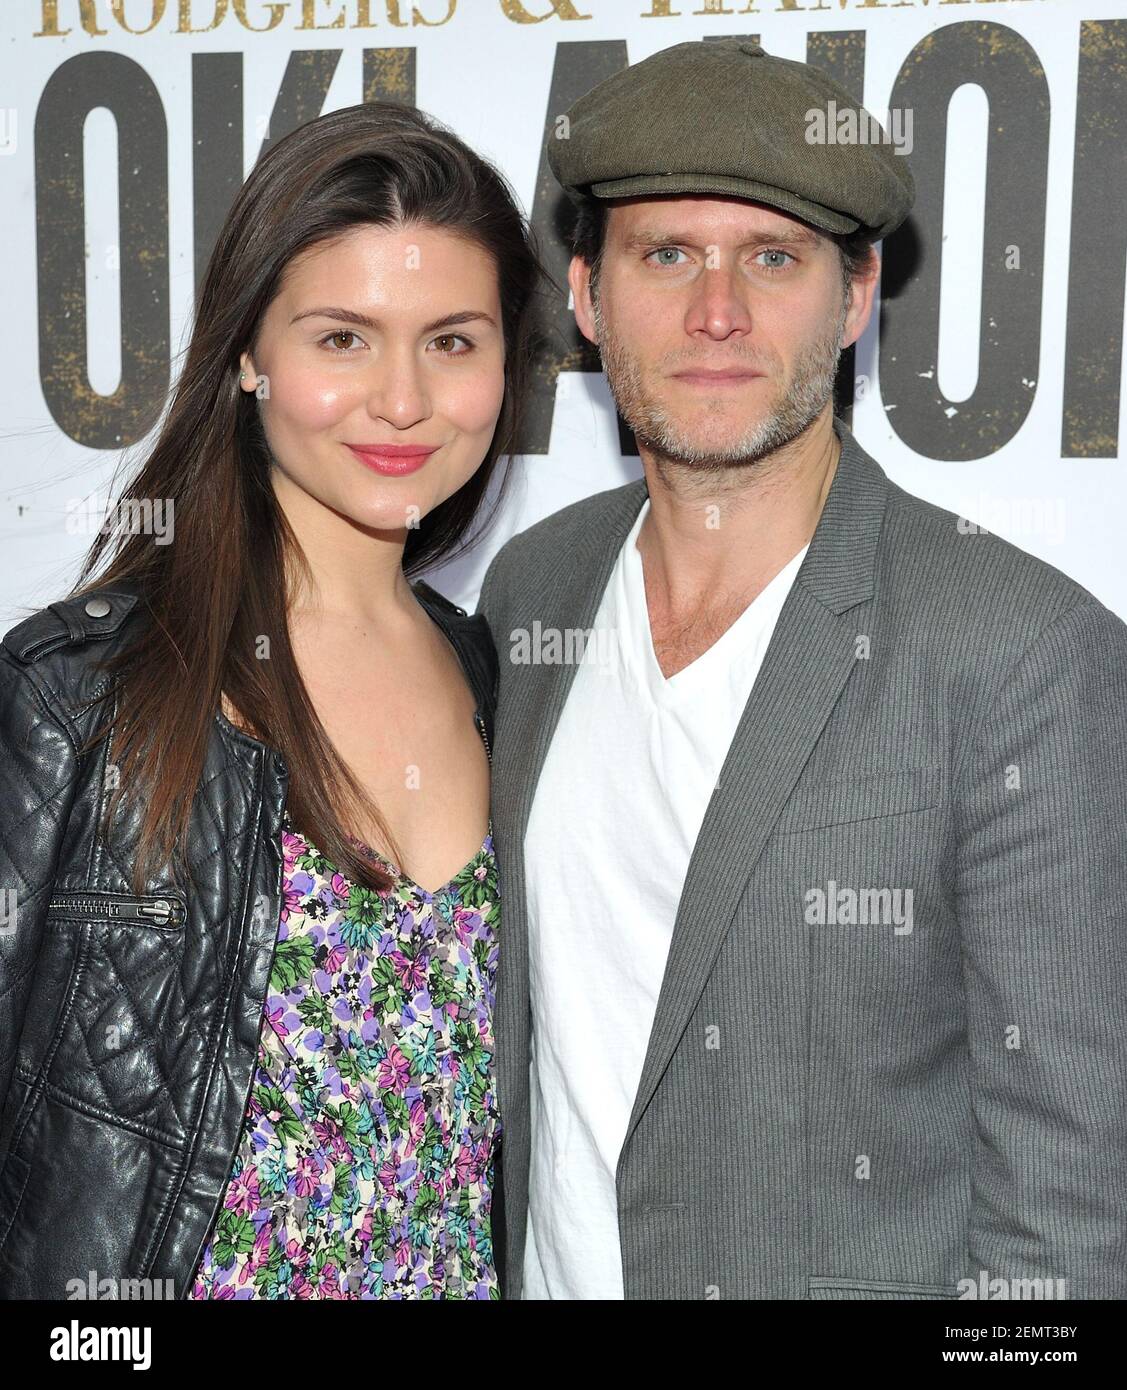 Actor Steven Pasquale (R) and guest attend the opening performance of Oklahoma! at the Circle in the Square Theatre in New York, NY on April 7, 2019. (Photo by Stephen Smith/SIPA USA) Stock Photo